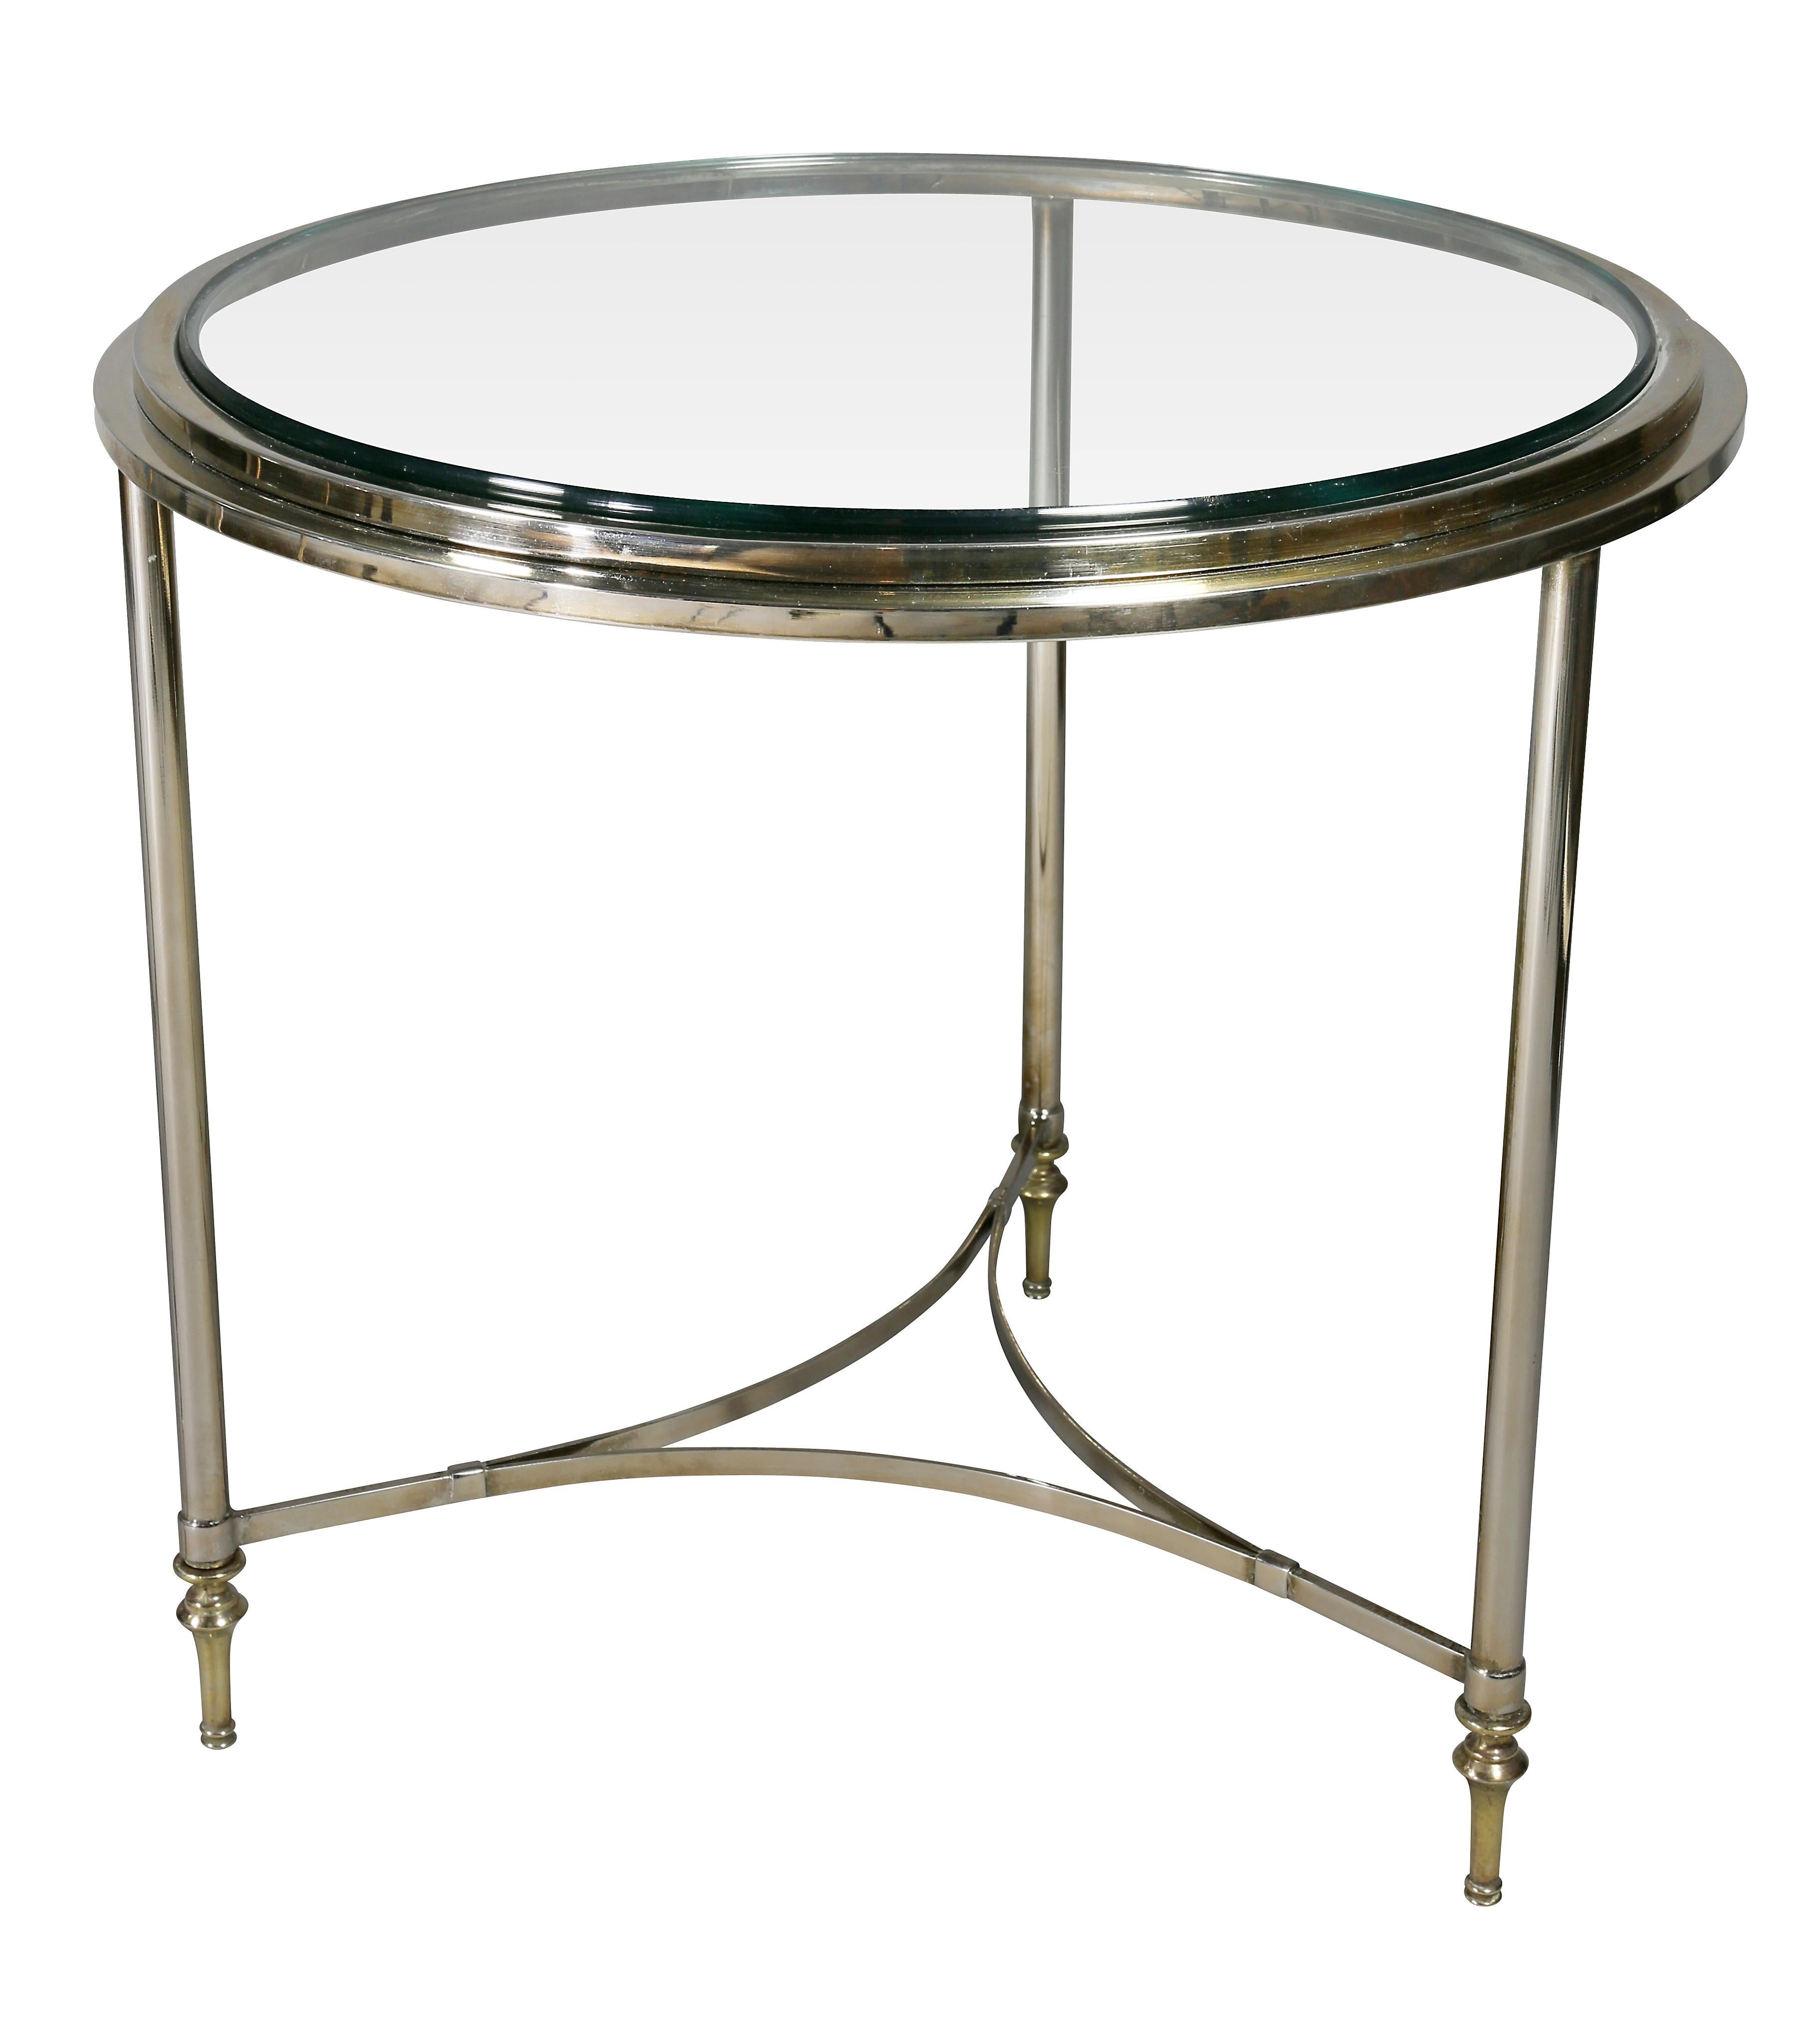 From the 1970s. Circular with glass inserts, three circular tapered legs and stretchers.